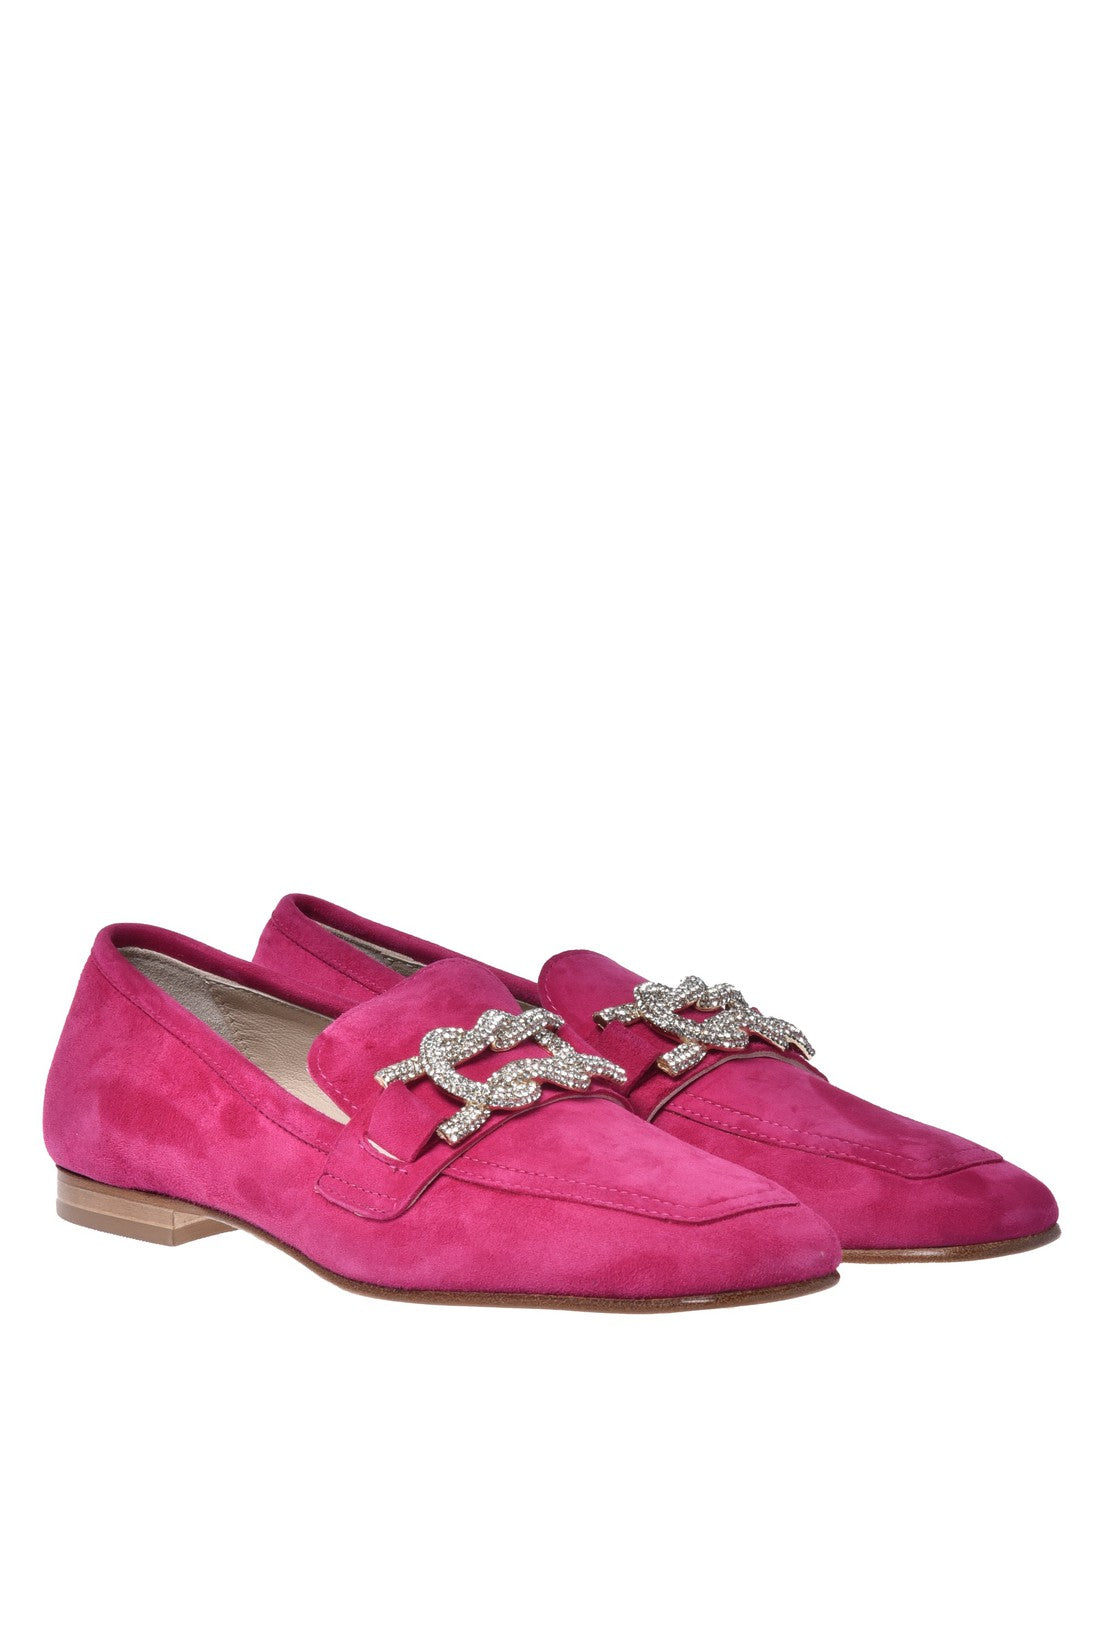 Loafer in fuchsia suede